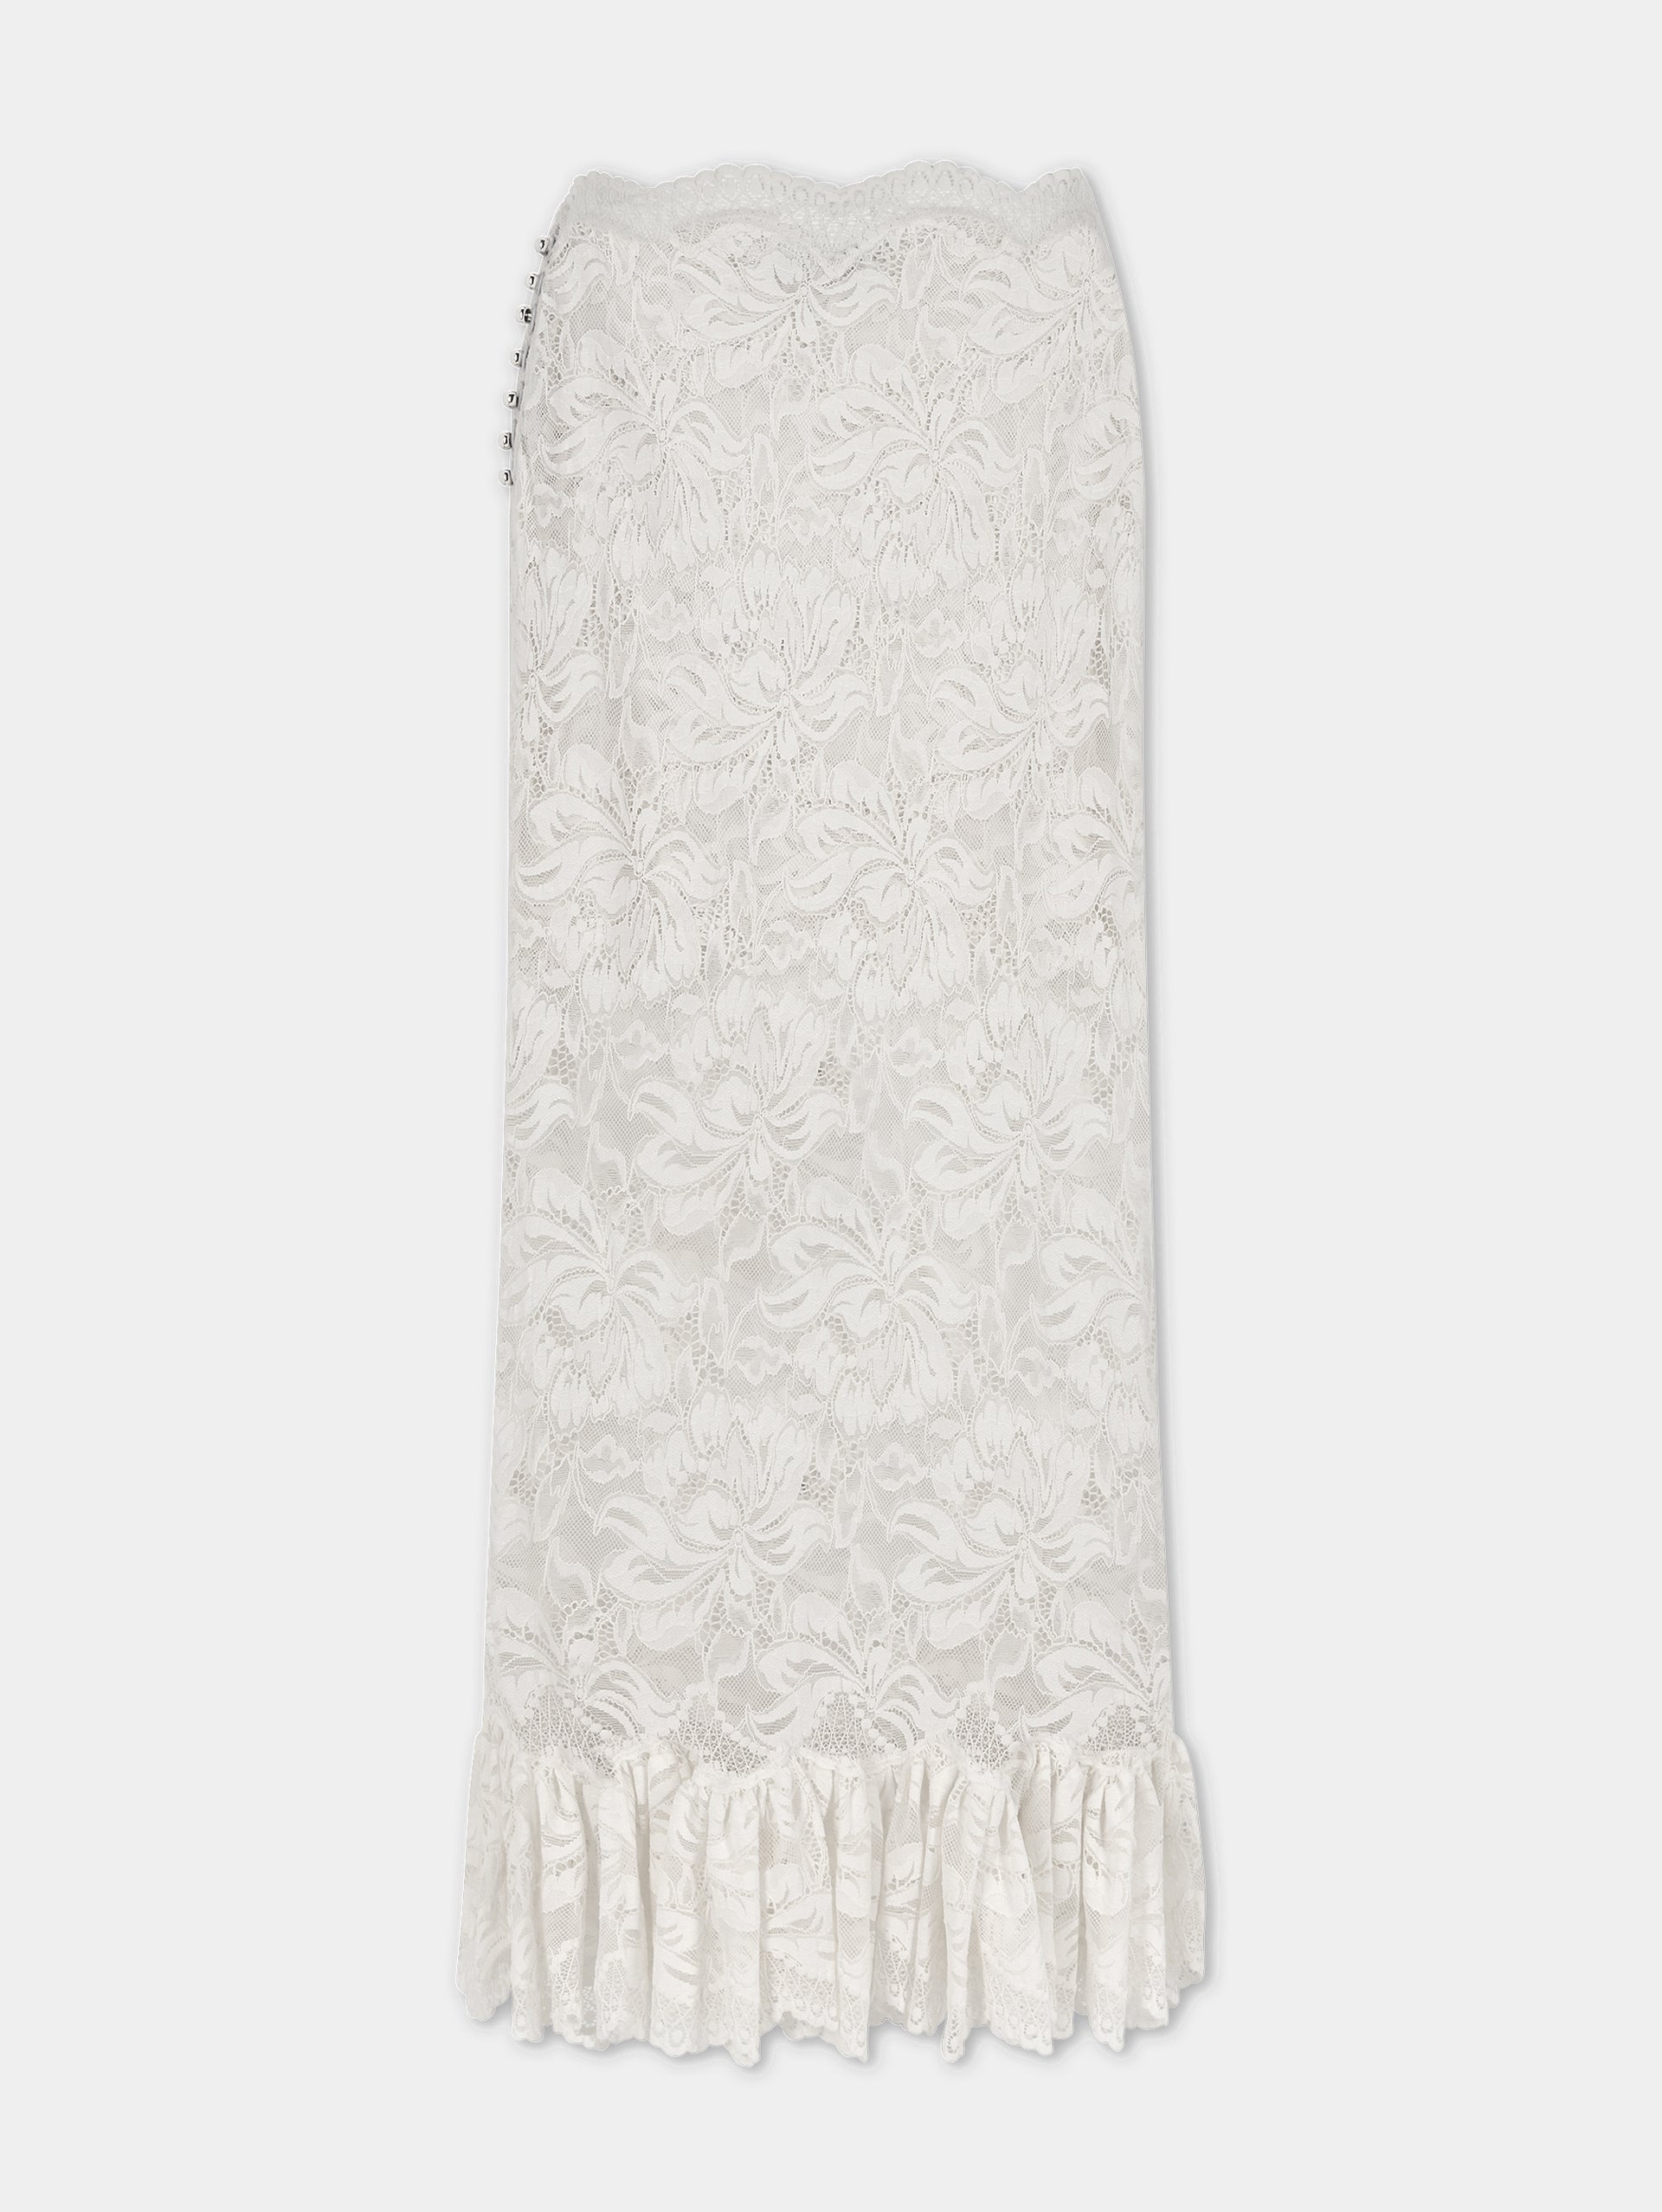 MAXI STRETCH LACE IVORY SKIRT - 7